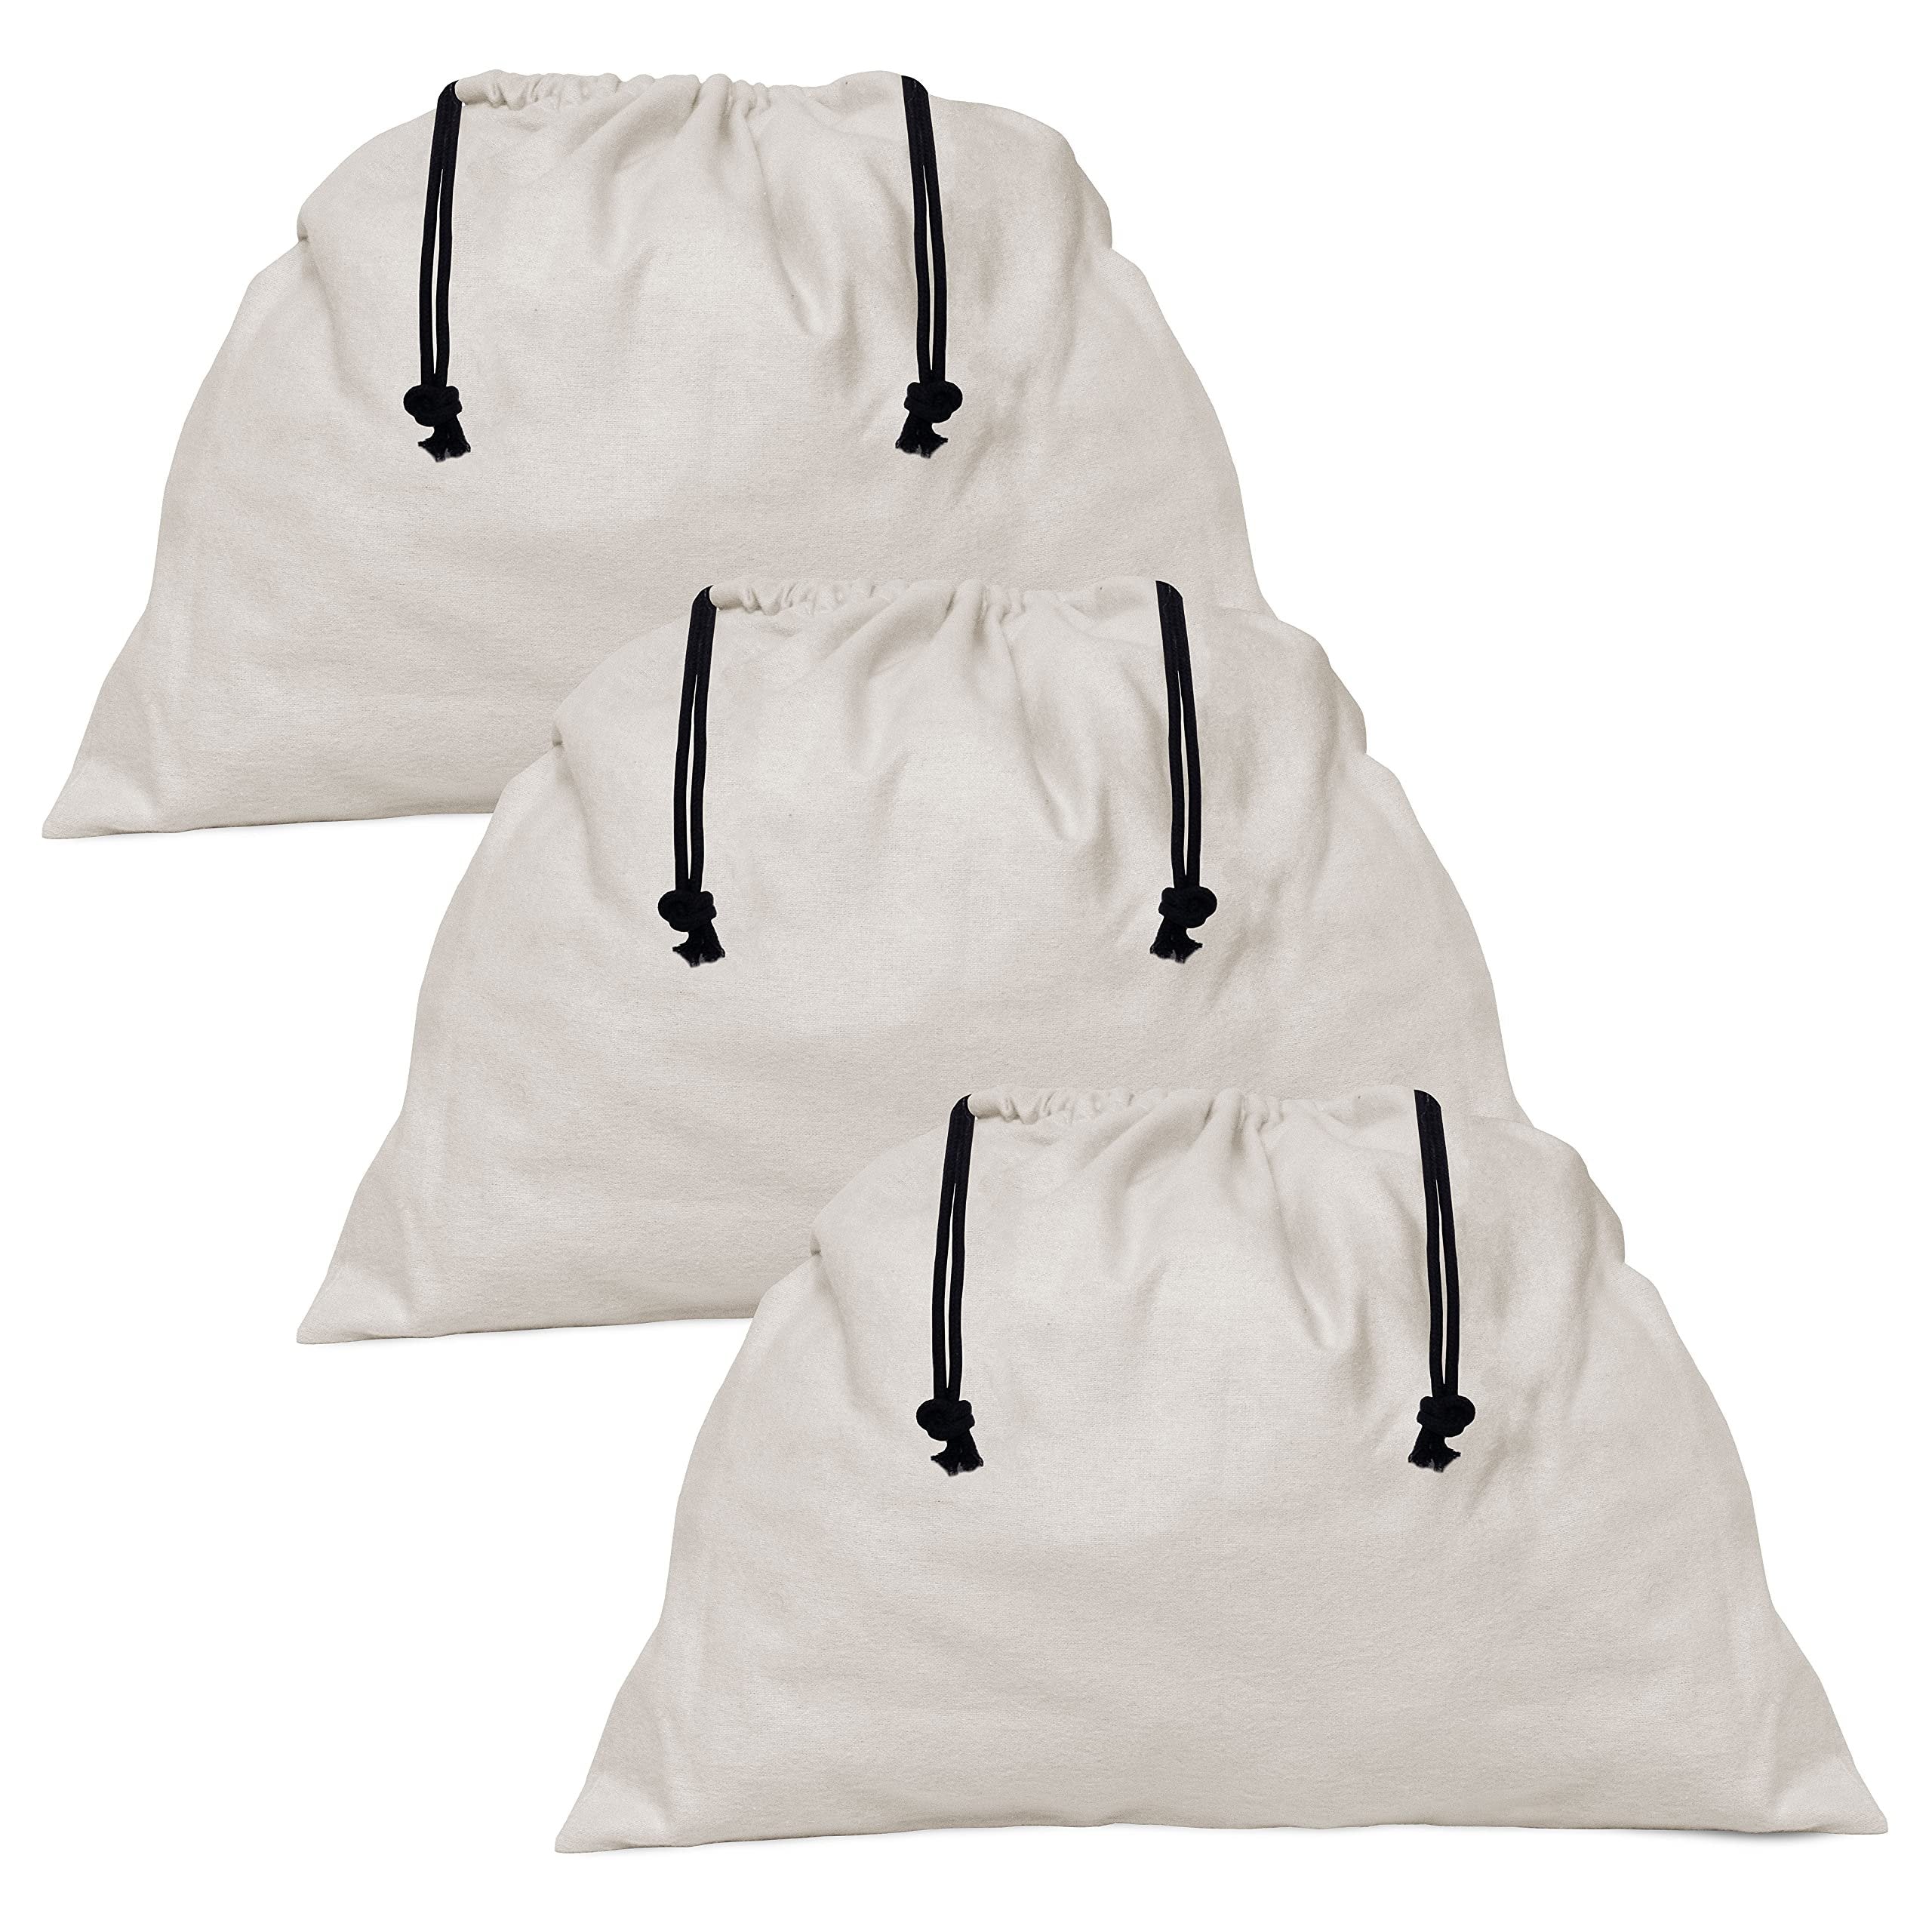 3 Pack Large Dust Bags for Handbags - Storage Pouches 19.8x15 w/ Drawstring Closure, Ideal for Travel, Shoes, Purses, Luggage, Home - Free Shipping